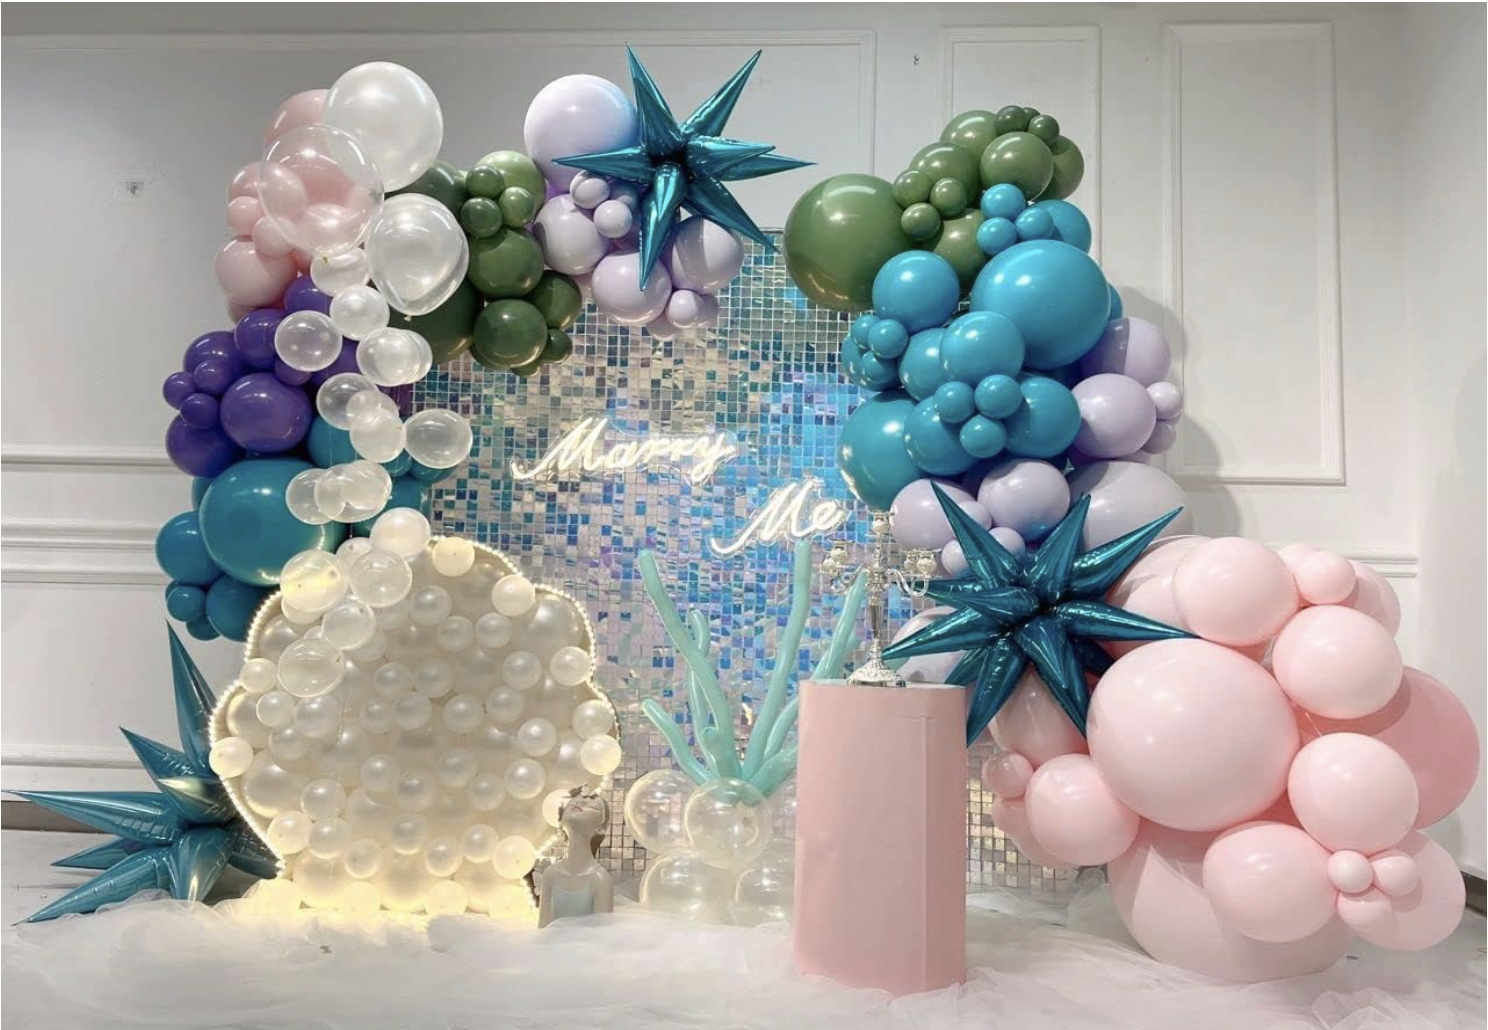 How to make a beautiful balloon arch